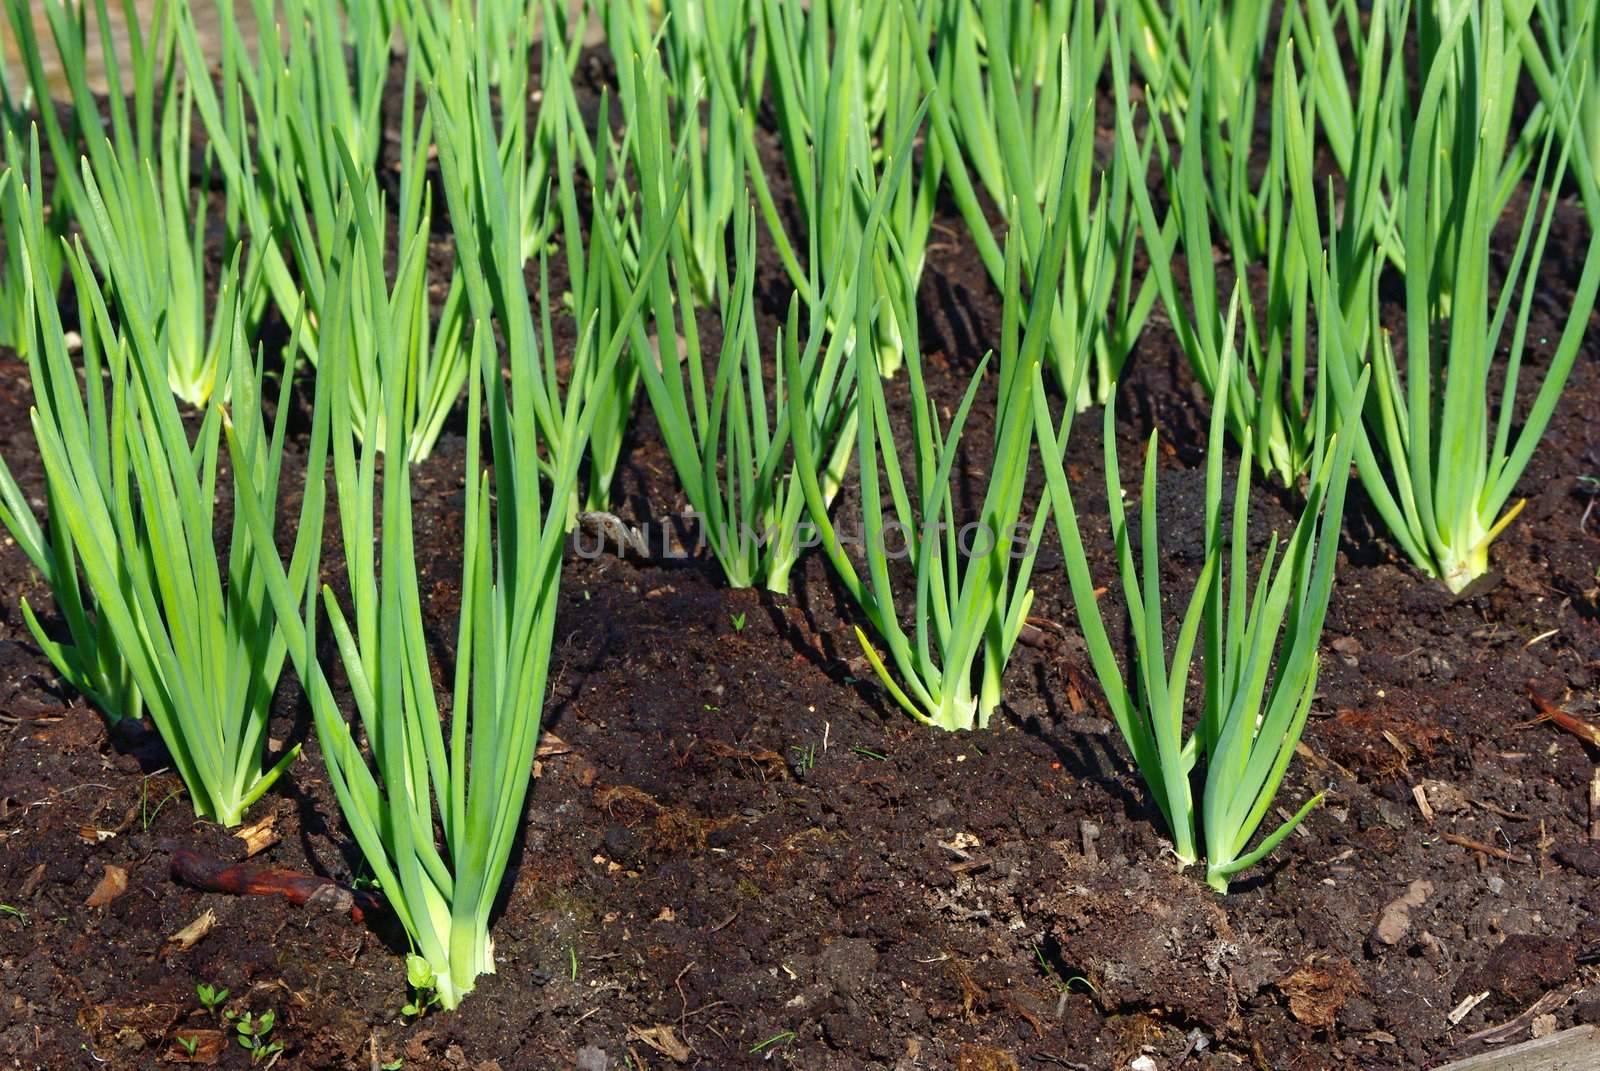 Onion sprouts in early spring at the garden by Vitamin